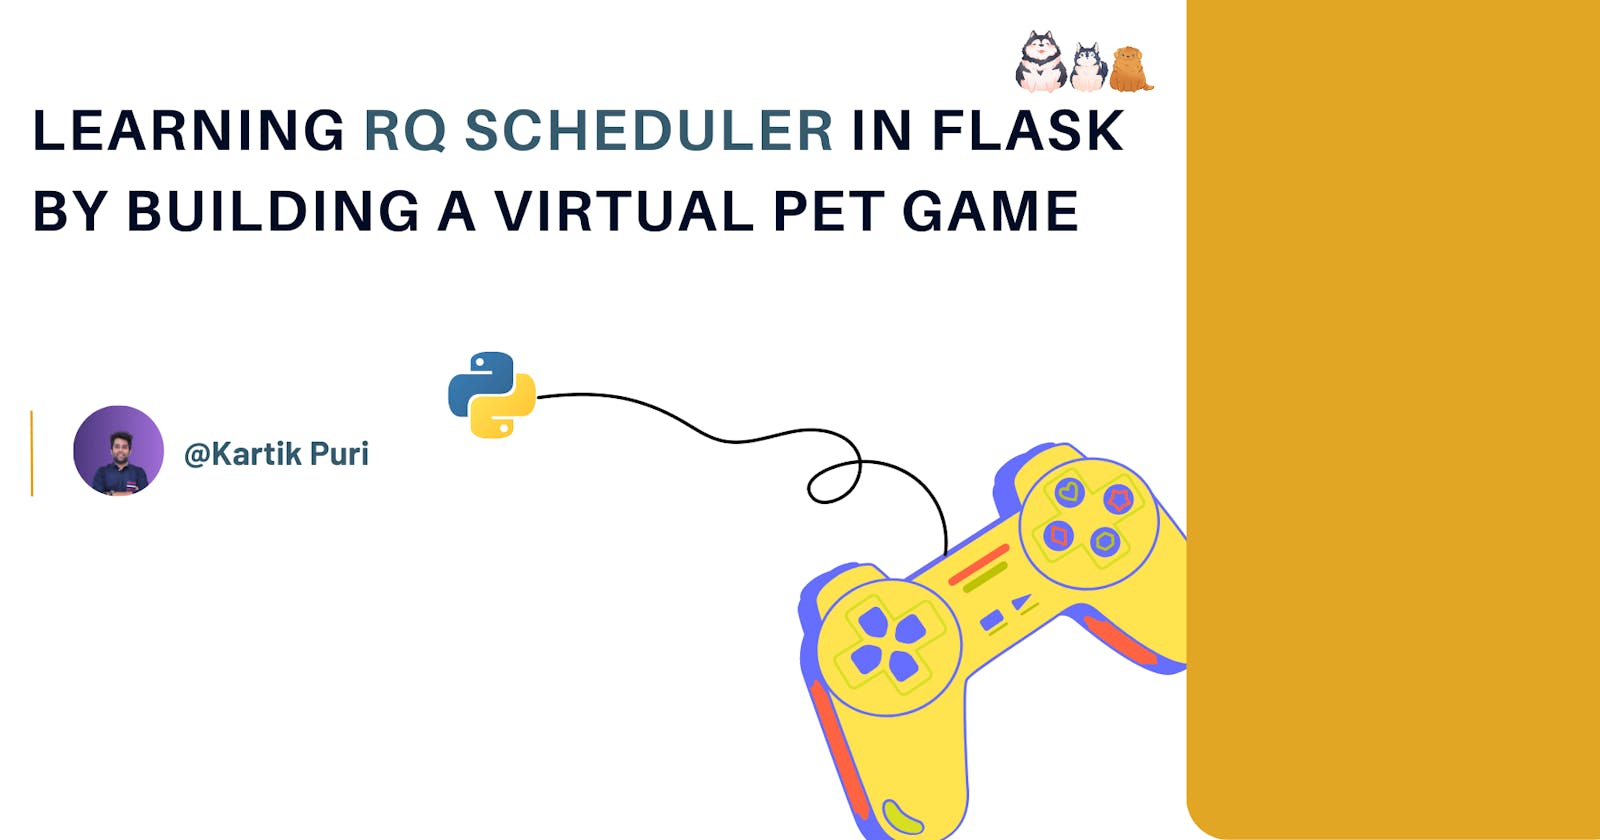 Learning RQ Scheduler in Flask by Building a Virtual Pet Game